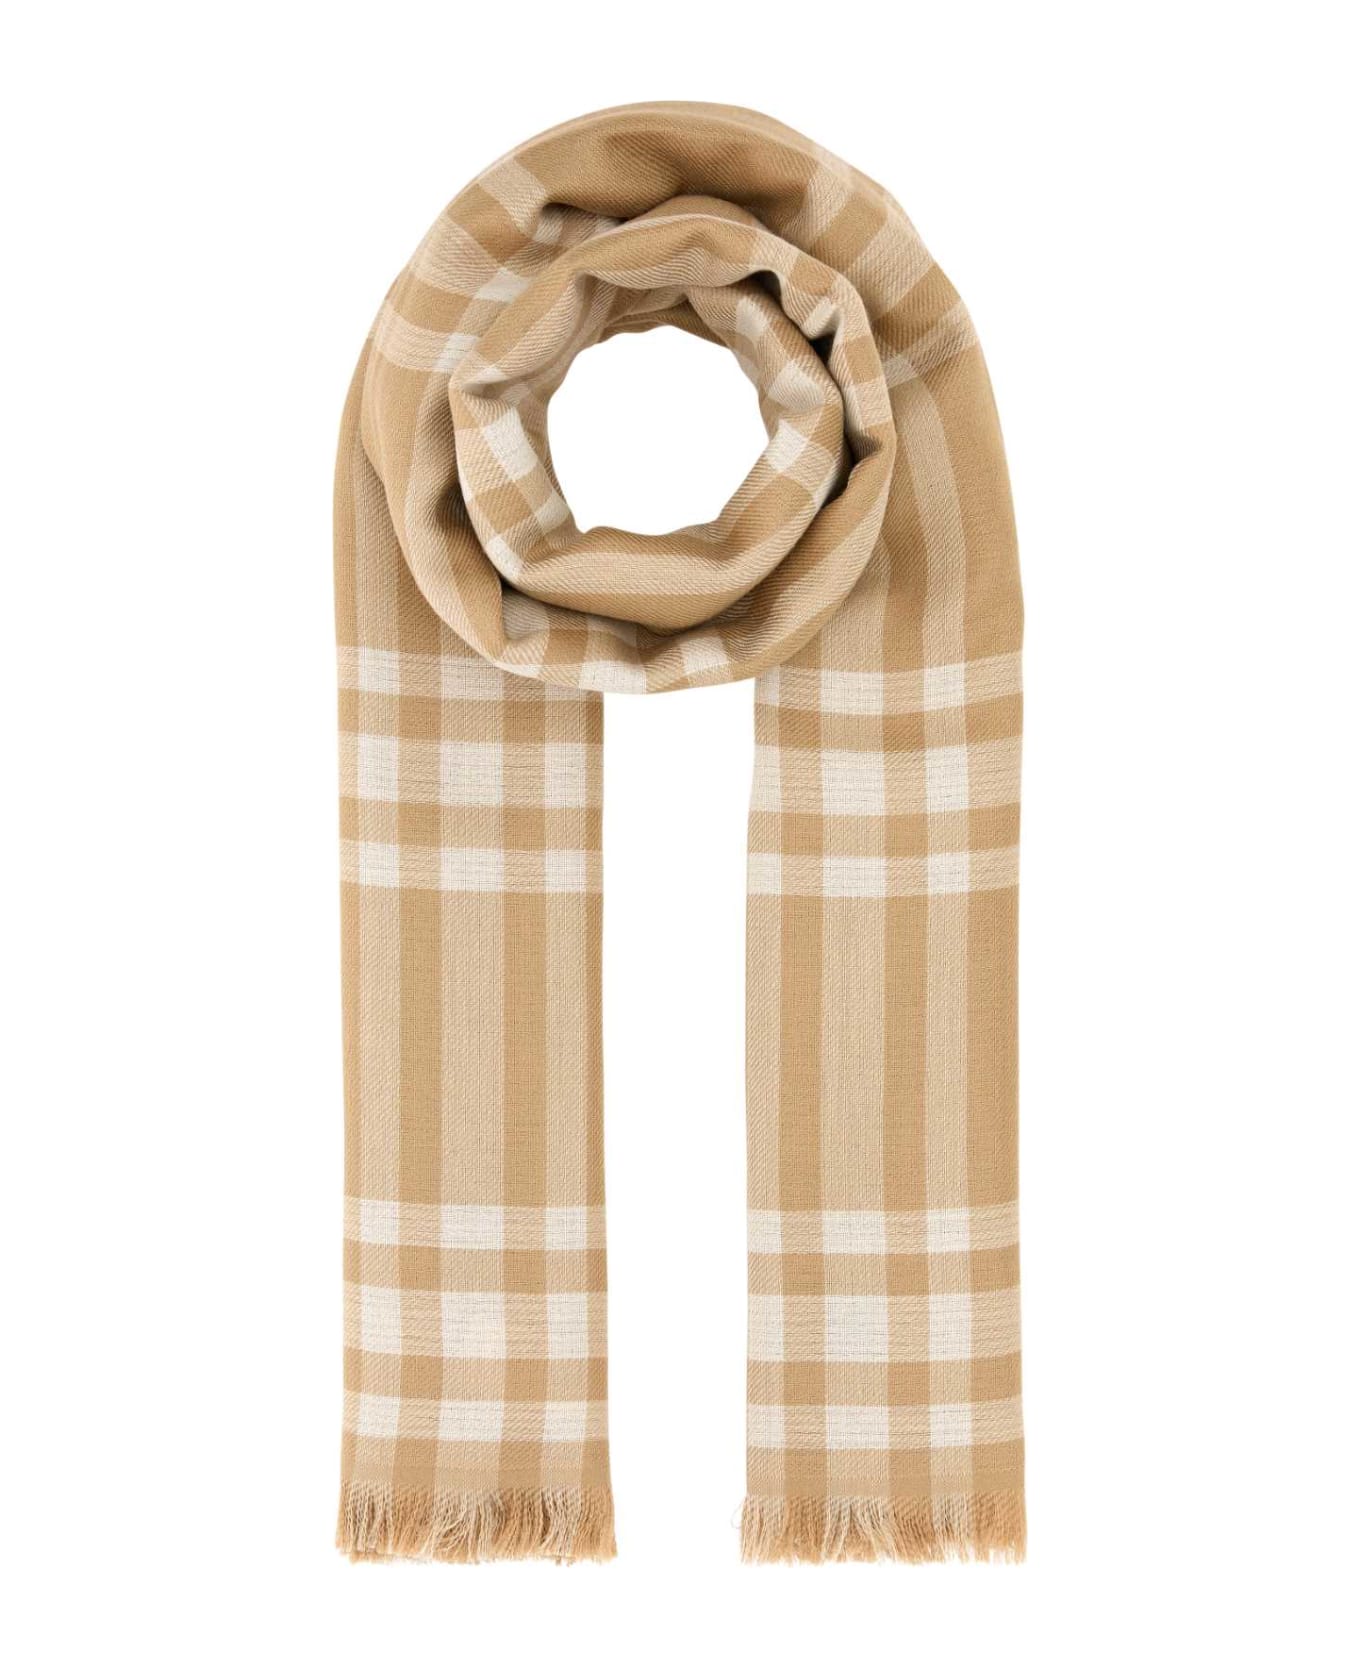 Burberry Embroidered Wool Blend Scarf - CAMEL スカーフ＆ストール